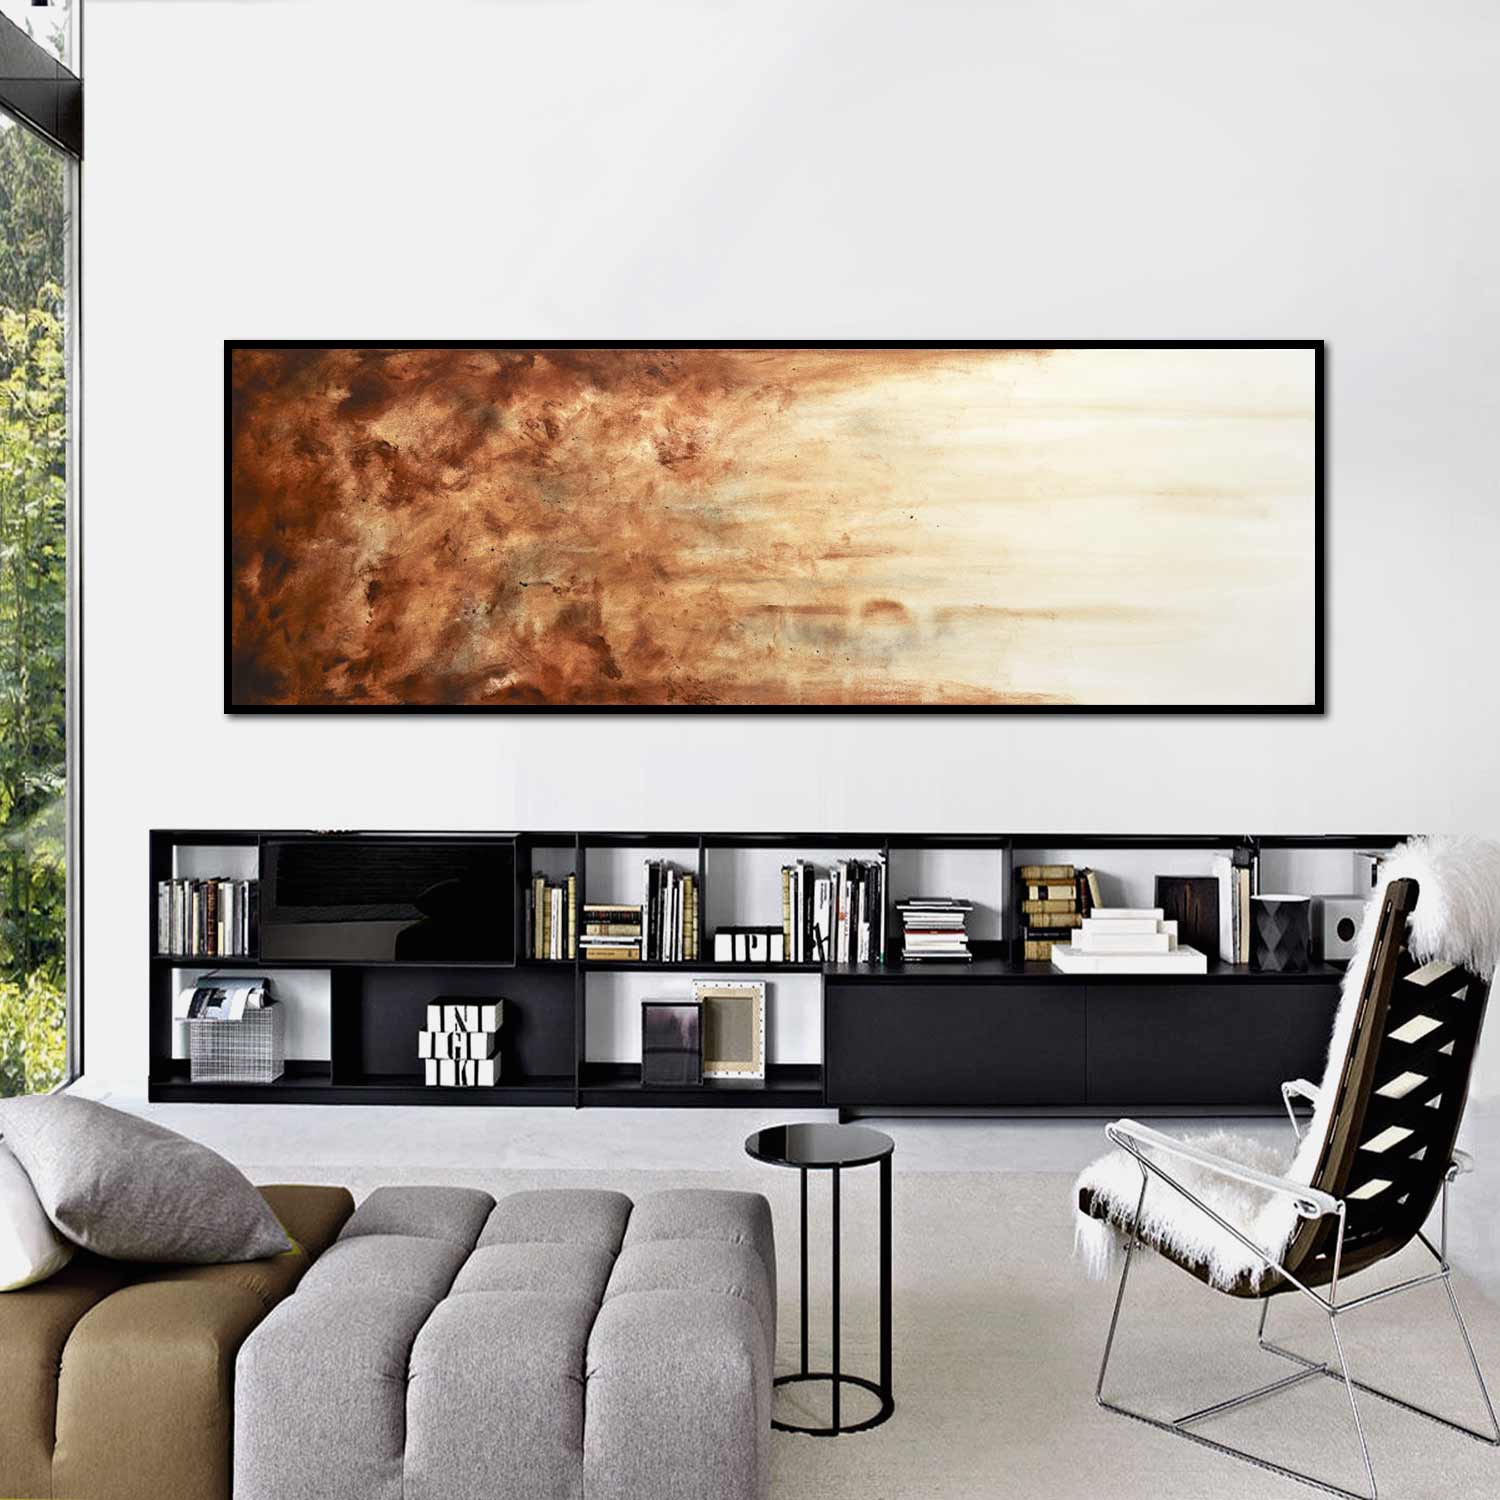 Panoramic Painting Fluid Art Drip Wall Design "Outside"